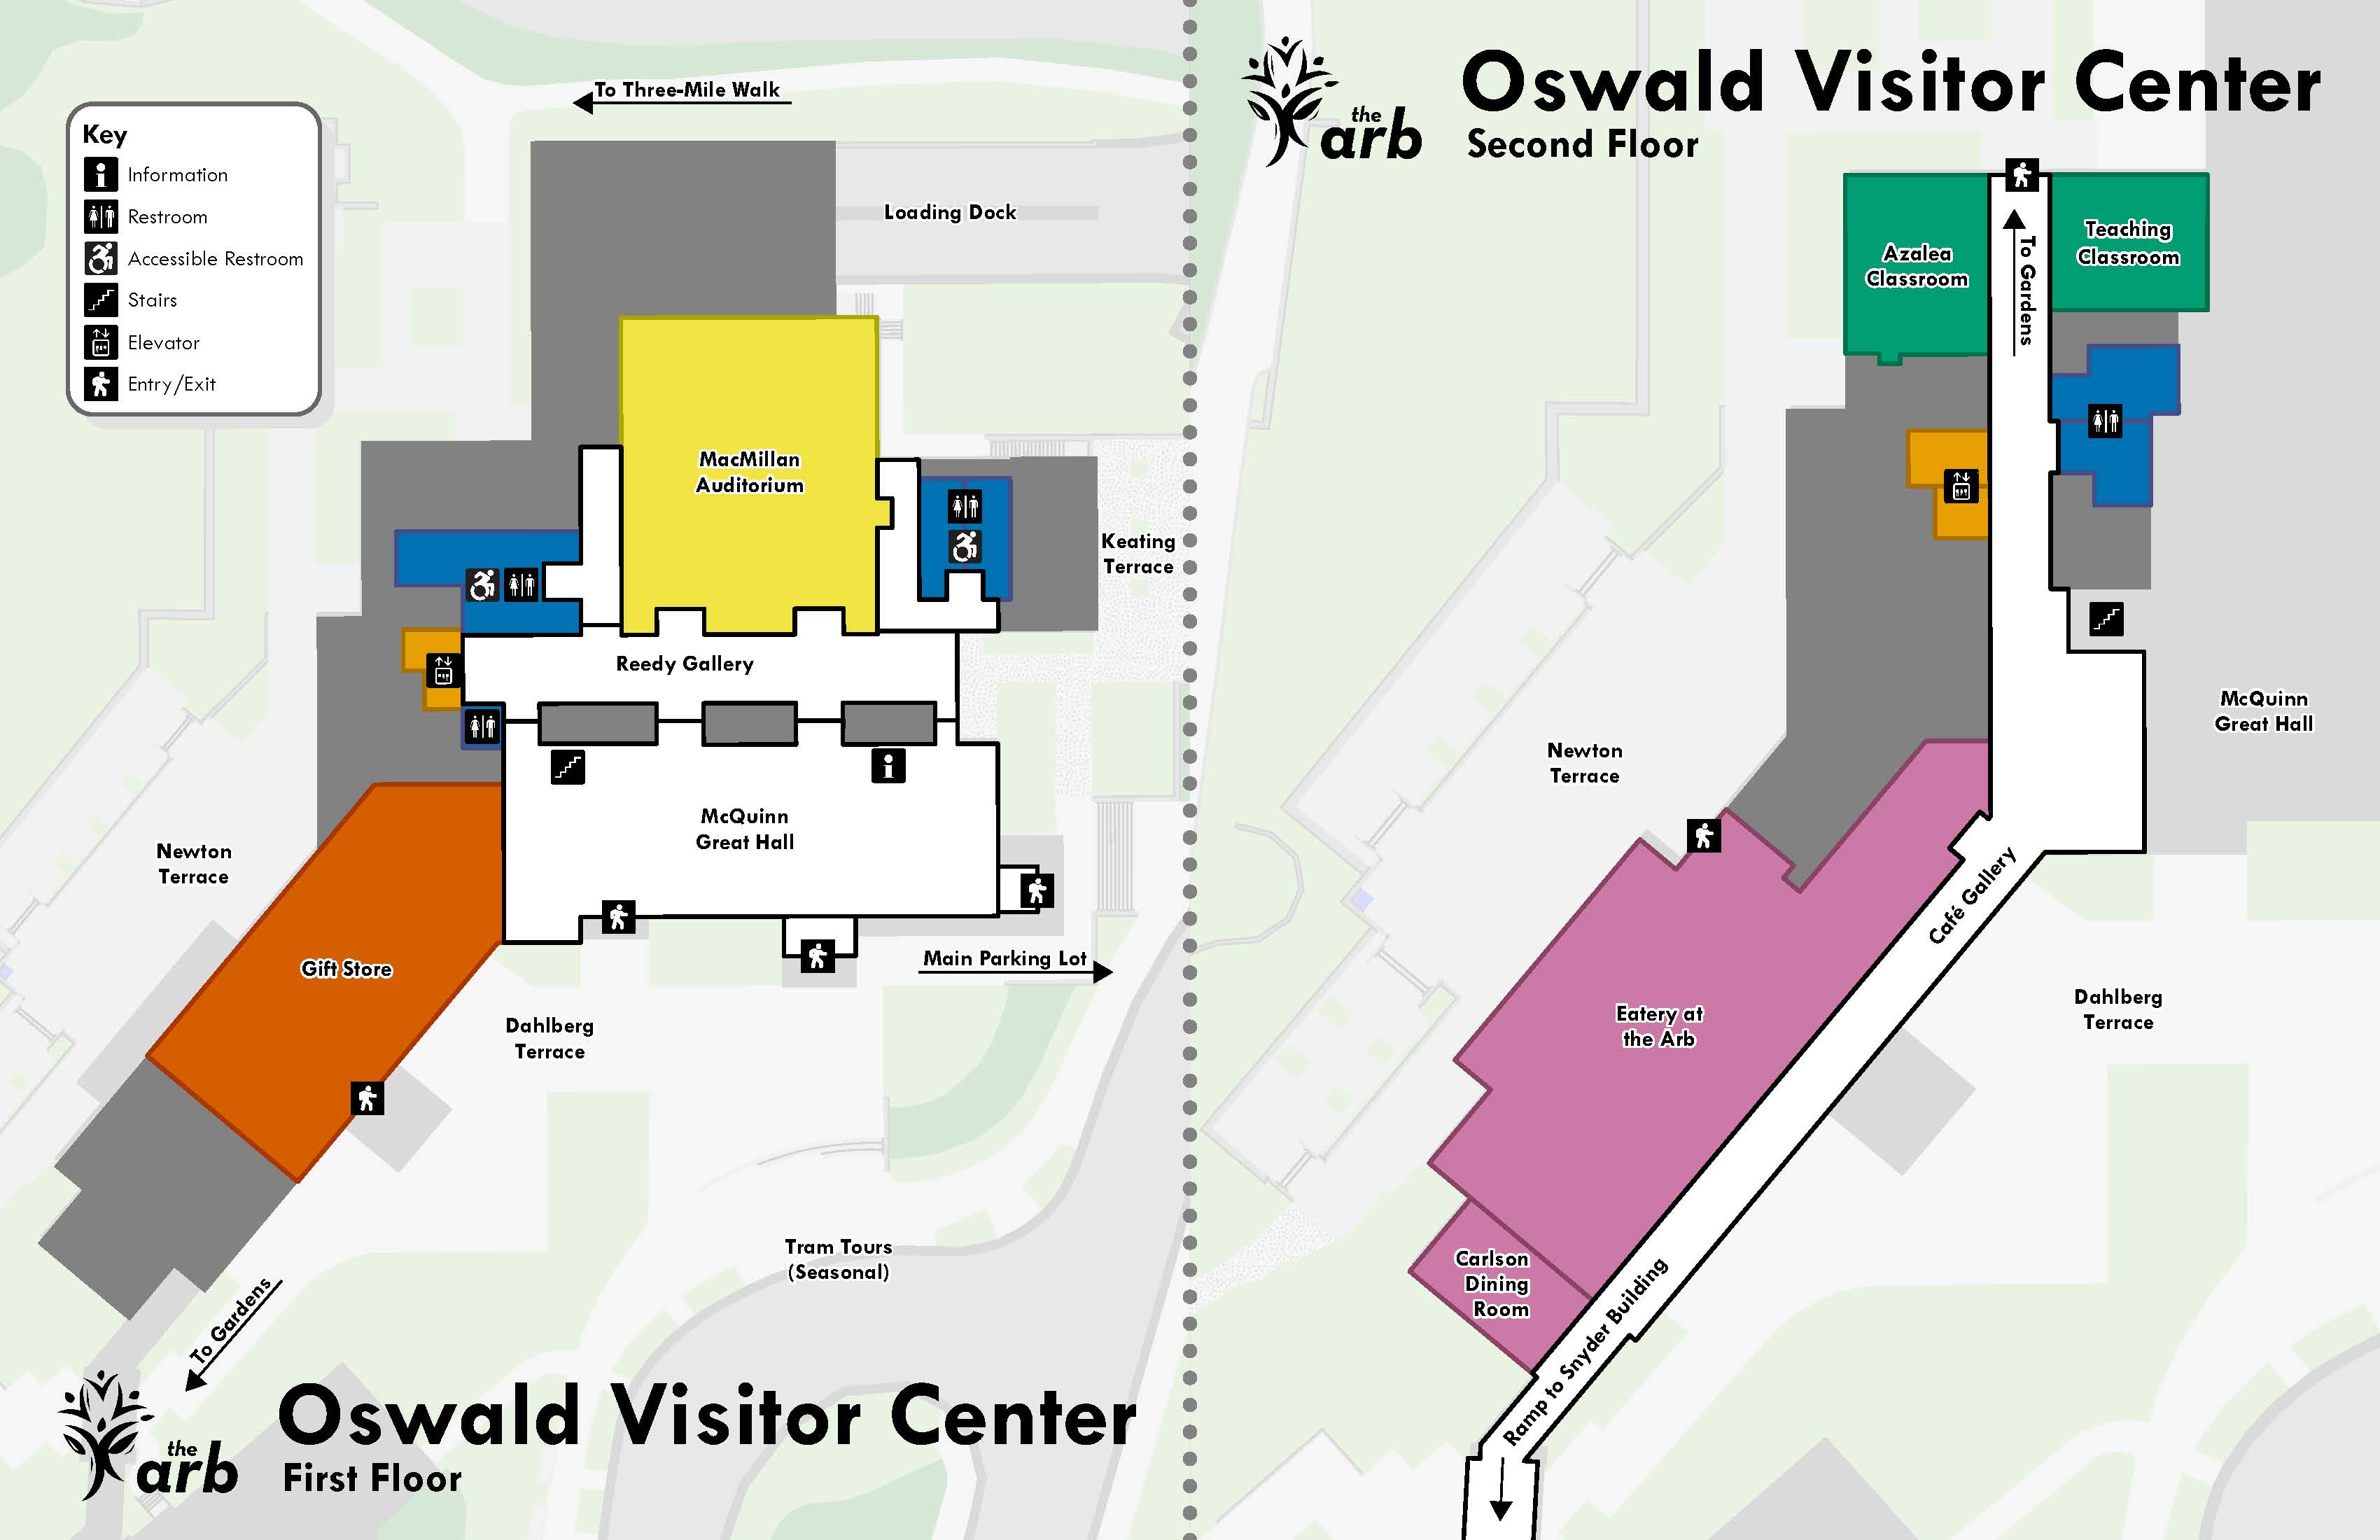 First and second floor maps of the oswald visitor center